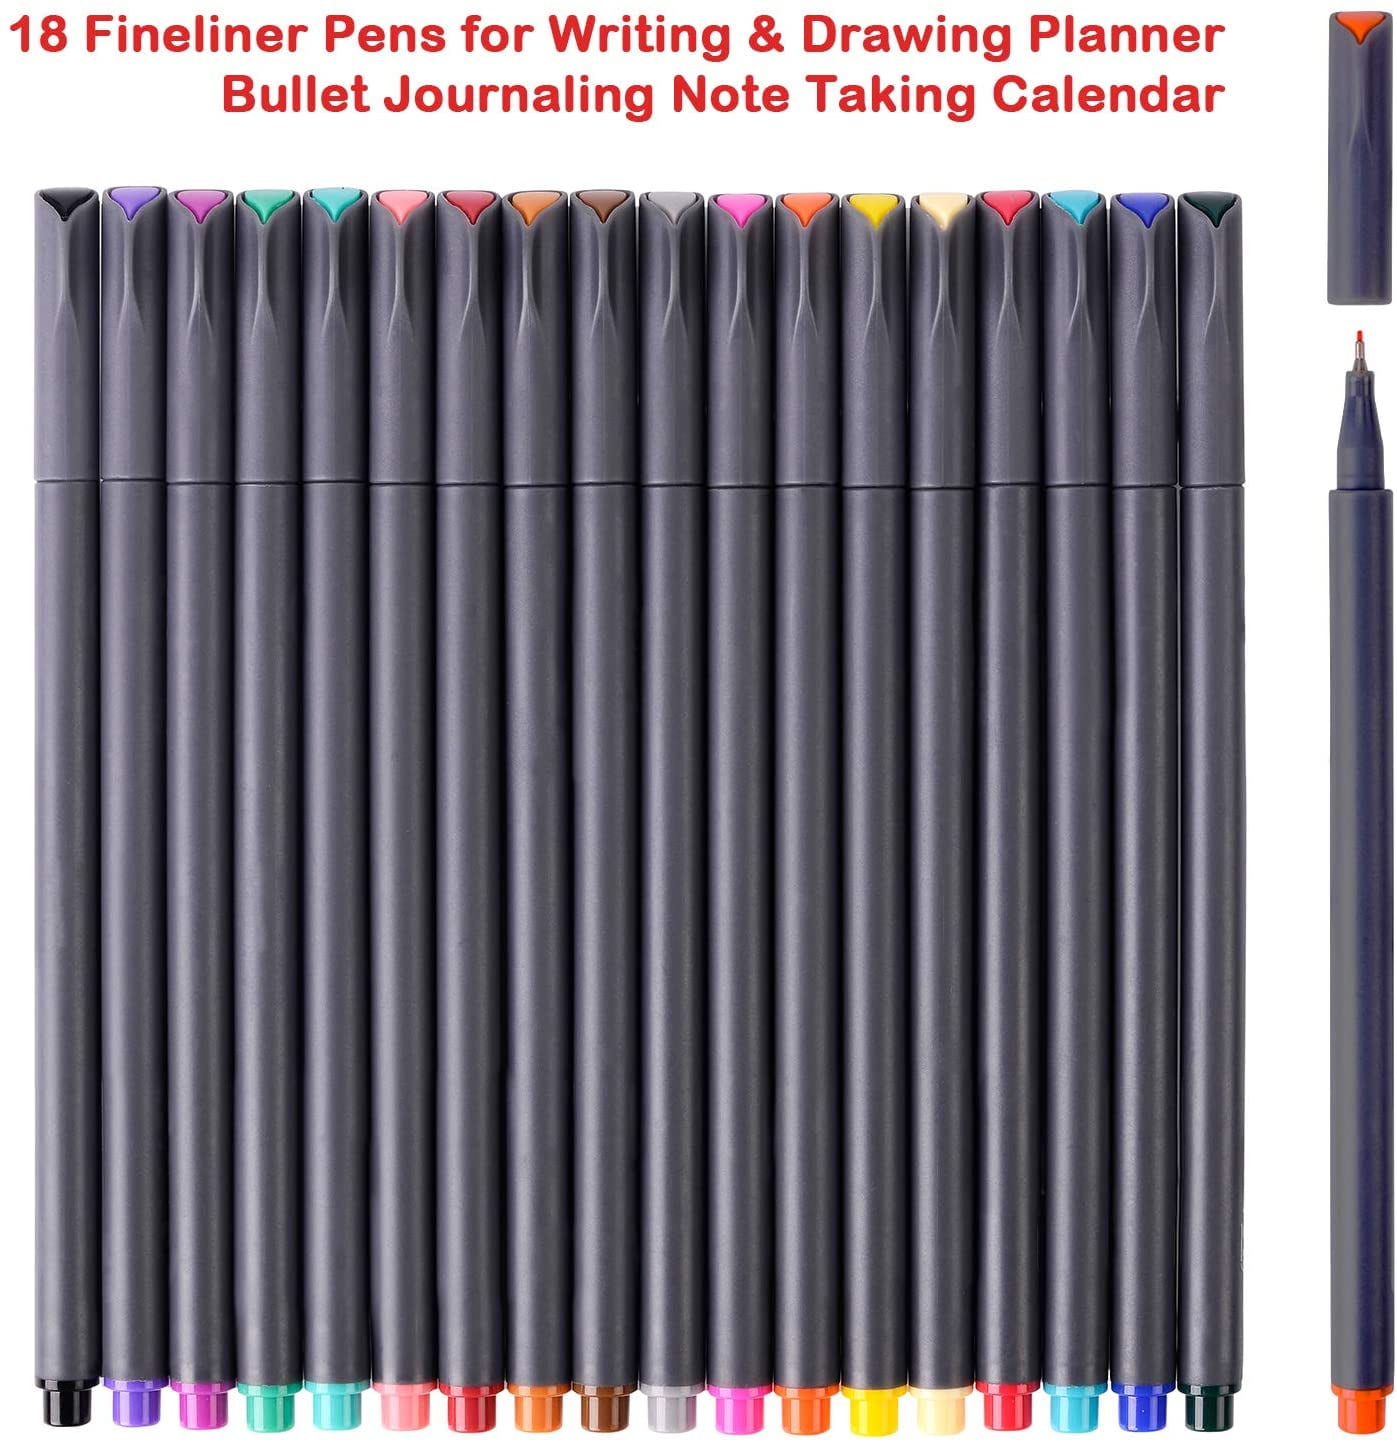 Metallic Colors Journal Planner Pens Colorful 0.5mm Markers Fine Tip  Drawing Pen Porous Fineliner Pen for Bullet Journaling Writing Note Taking